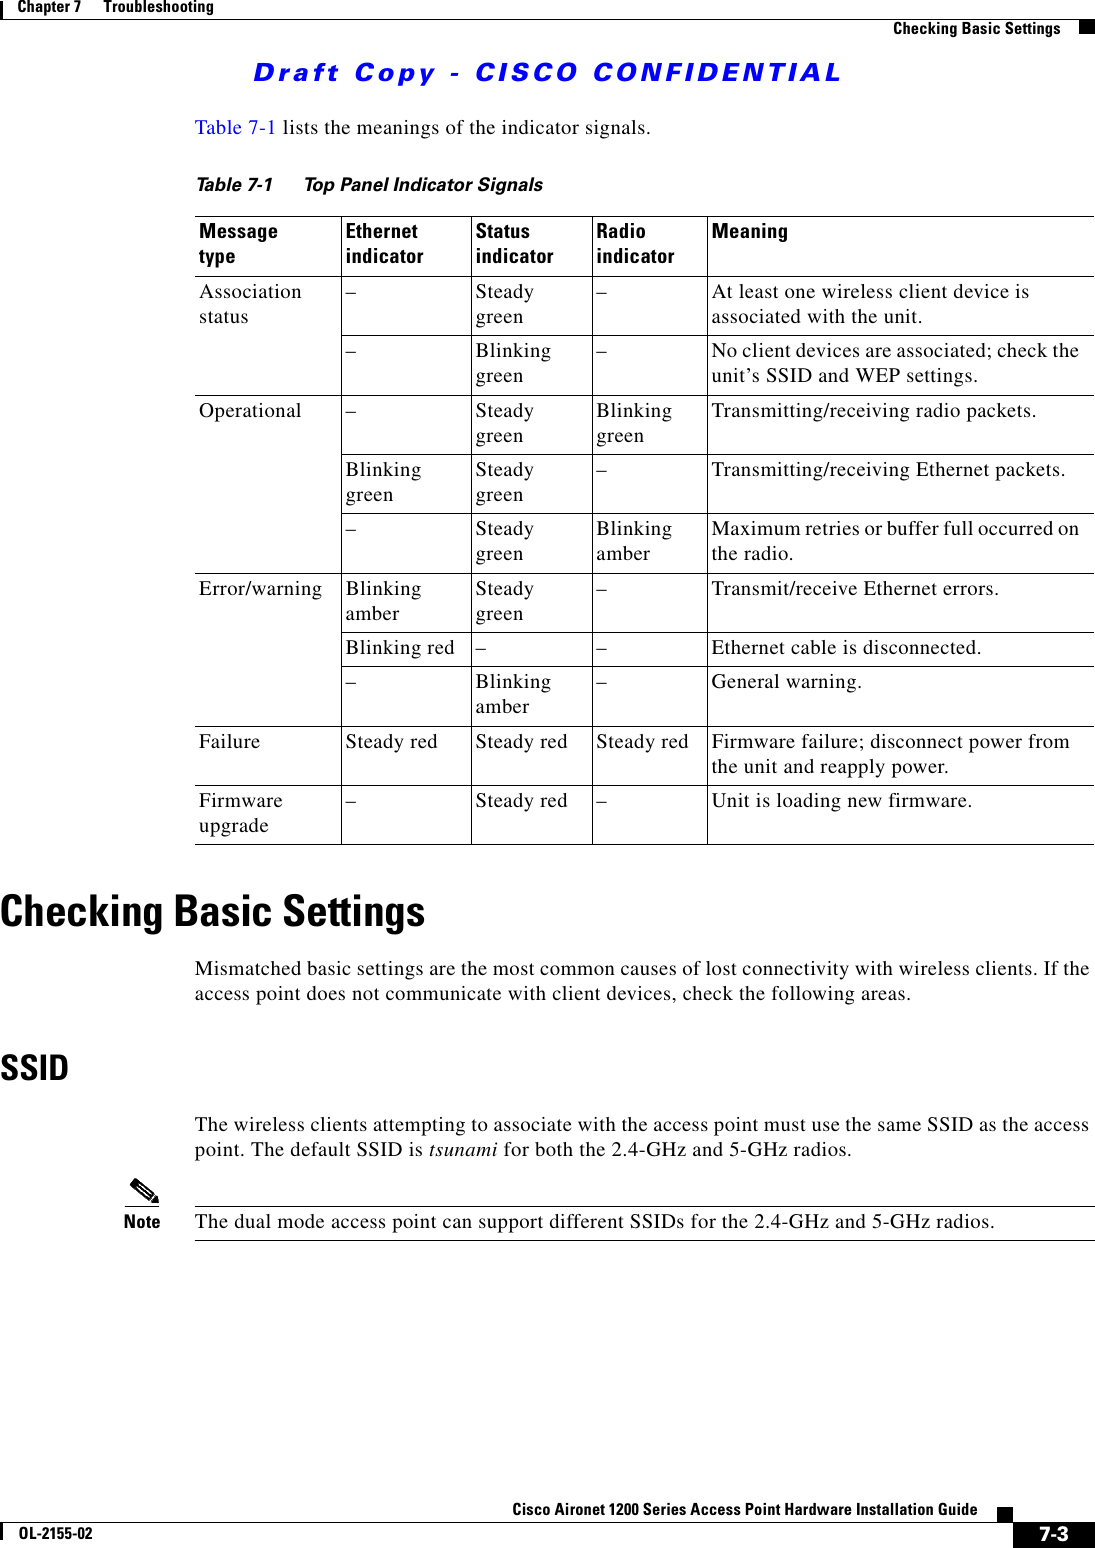 Draft Copy - CISCO CONFIDENTIAL 7-3Cisco Aironet 1200 Series Access Point Hardware Installation GuideOL-2155-02Chapter 7      TroubleshootingChecking Basic SettingsTable 7-1 lists the meanings of the indicator signals.Table 7-1 Top Panel Indicator SignalsChecking Basic SettingsMismatched basic settings are the most common causes of lost connectivity with wireless clients. If the access point does not communicate with client devices, check the following areas.SSIDThe wireless clients attempting to associate with the access point must use the same SSID as the access point. The default SSID is tsunami for both the 2.4-GHz and 5-GHz radios.Note The dual mode access point can support different SSIDs for the 2.4-GHz and 5-GHz radios.Message typeEthernet indicatorStatusindicatorRadioindicatorMeaningAssociation status –Steady green –At least one wireless client device is associated with the unit.–Blinking green –No client devices are associated; check the unit’s SSID and WEP settings.Operational –Steady green Blinking green Transmitting/receiving radio packets.Blinking green Steady green –Transmitting/receiving Ethernet packets.–Steady green Blinking amber Maximum retries or buffer full occurred on the radio.Error/warning Blinking amber Steady green –Transmit/receive Ethernet errors.Blinking red ––Ethernet cable is disconnected. –Blinking amber –General warning.Failure Steady red Steady red Steady red Firmware failure; disconnect power from the unit and reapply power.Firmware upgrade –Steady red –Unit is loading new firmware.